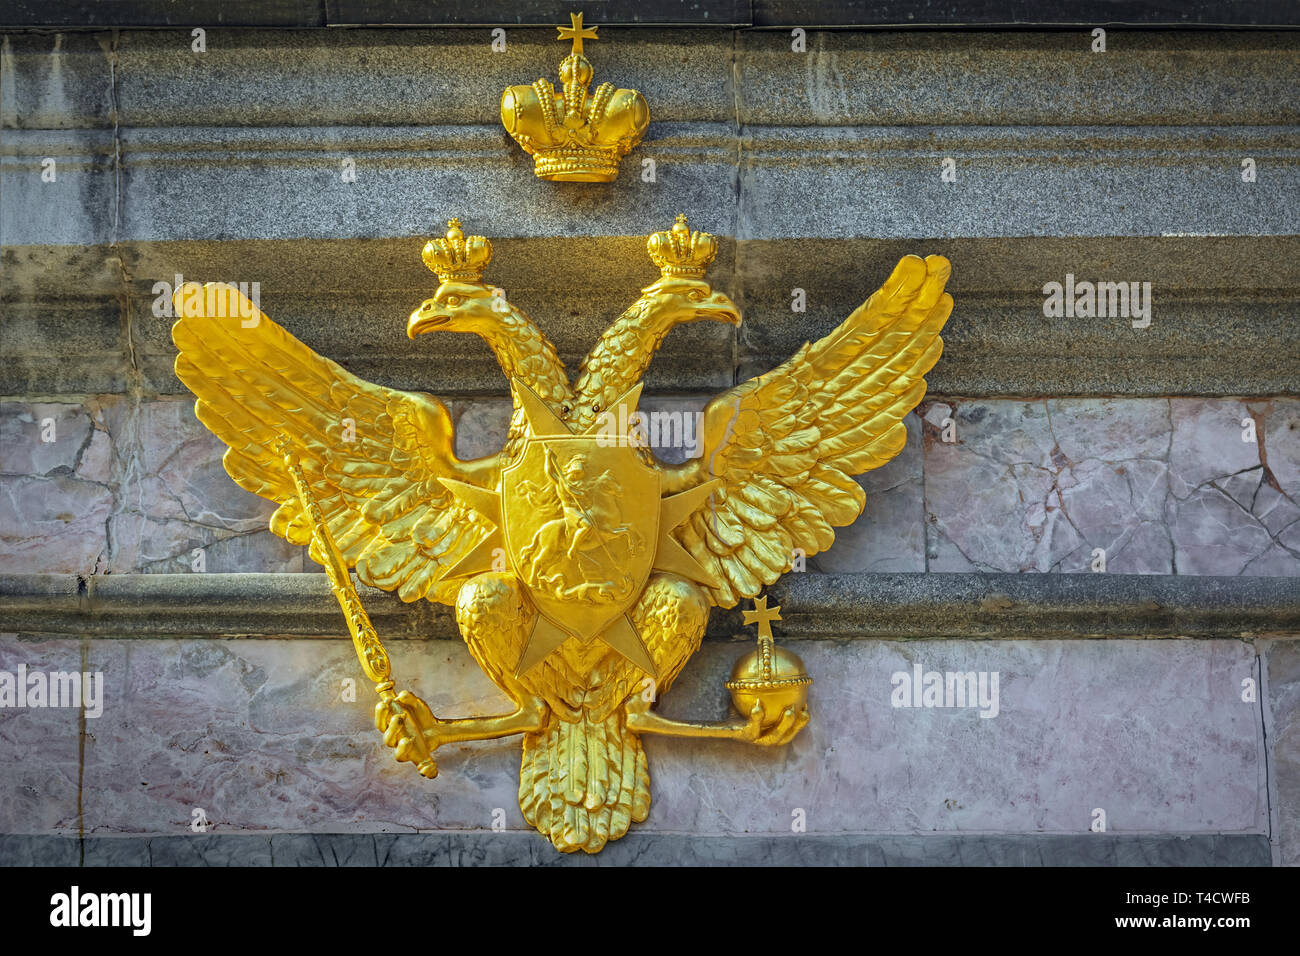 The gilded figure of a double-headed eagle with the crown of the Russian Empire, fortified on a pedestal of marble. Stock Photo